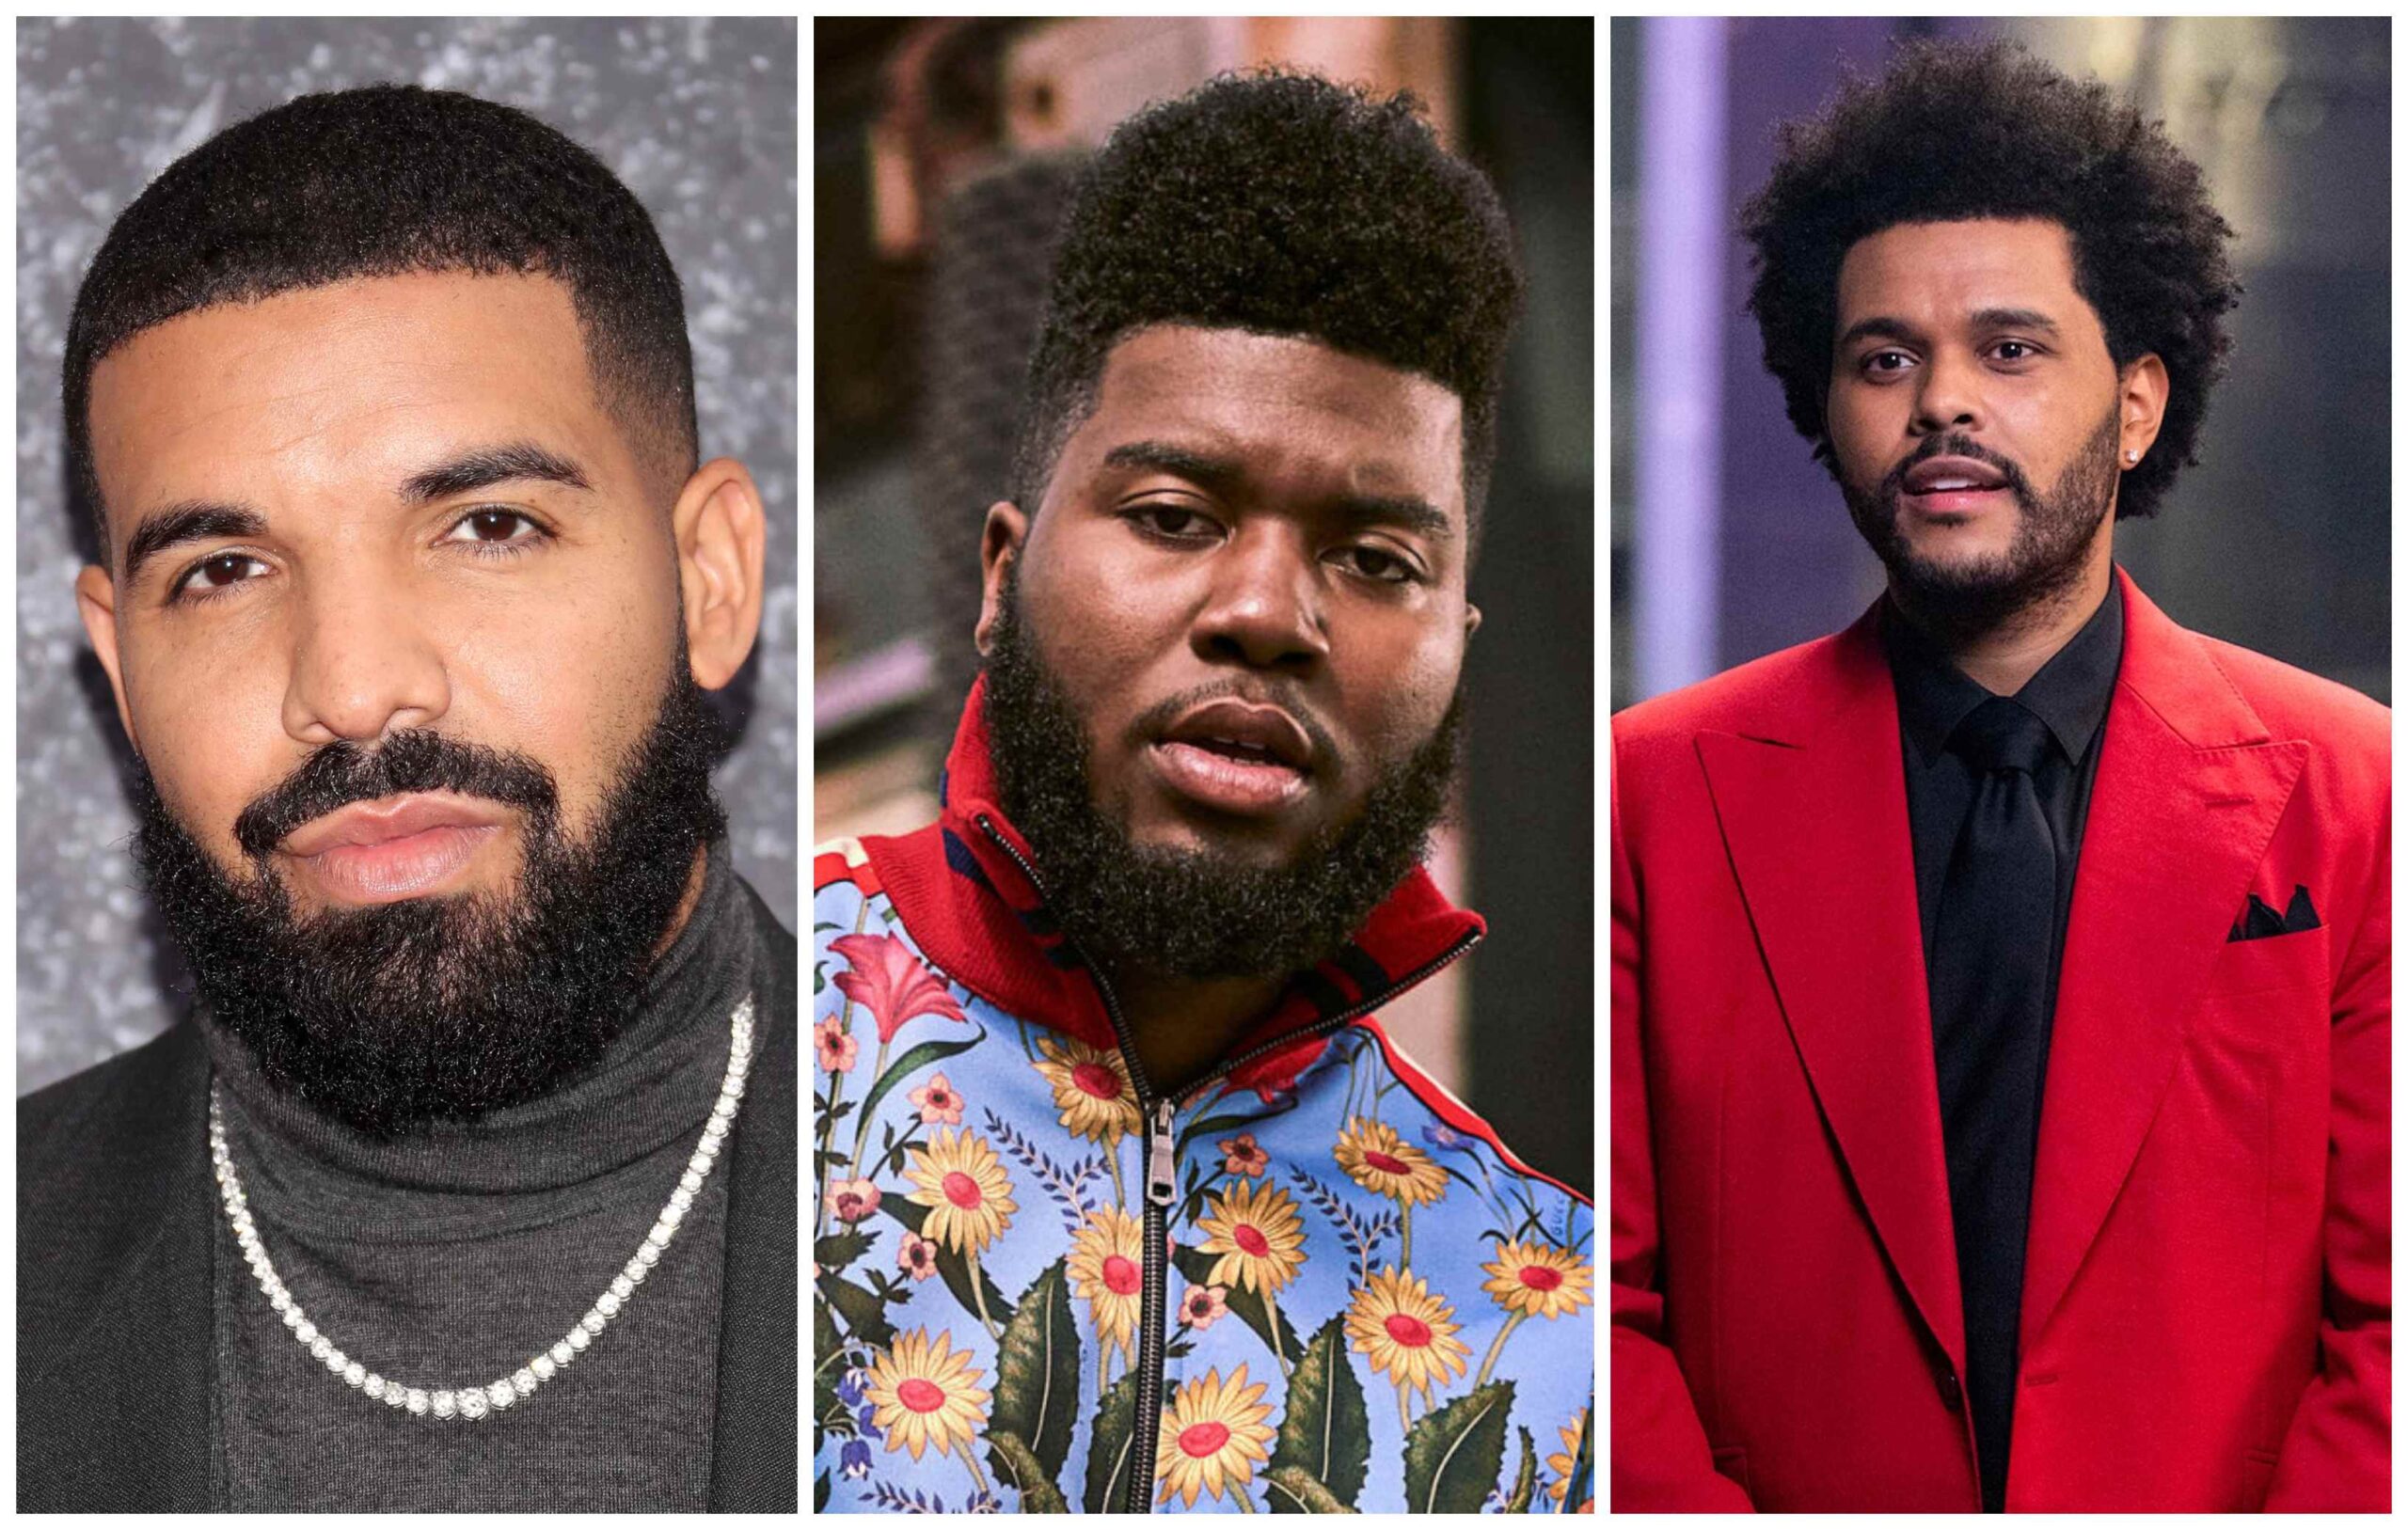 Case study: Drake, Khalid, The Weeknd popular picks for chill playlists in Kenya